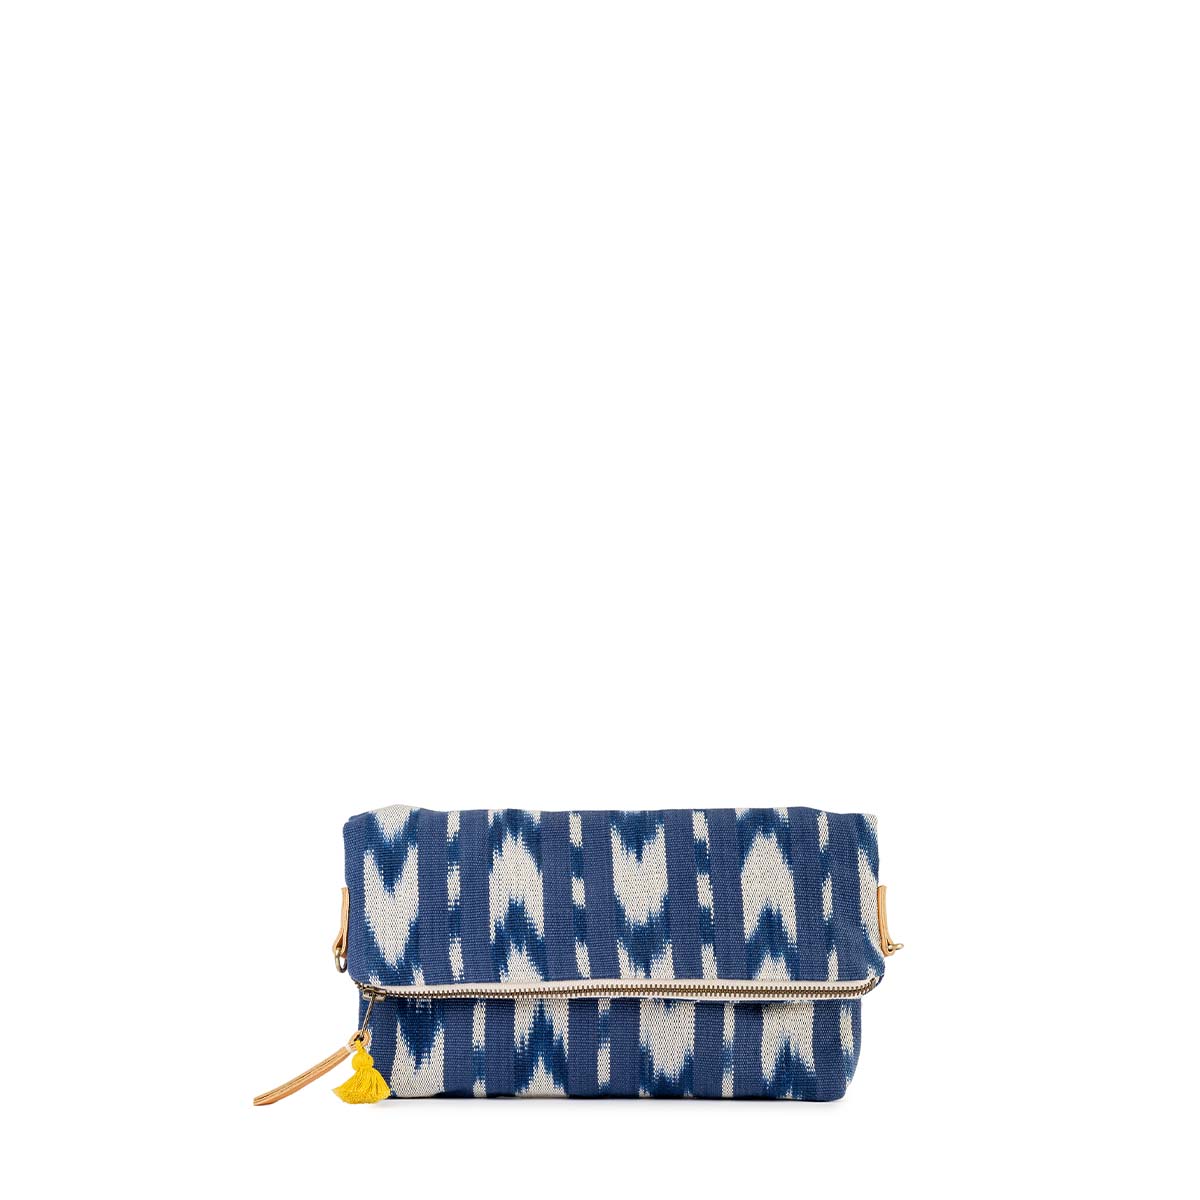 Folded hand woven artisan Florentina Clutch-to-Hobo in Atitlán Hills. It has vertical and chevron dark blue and white stripes. A yellow mini tassel and leather zipper pull is attached.